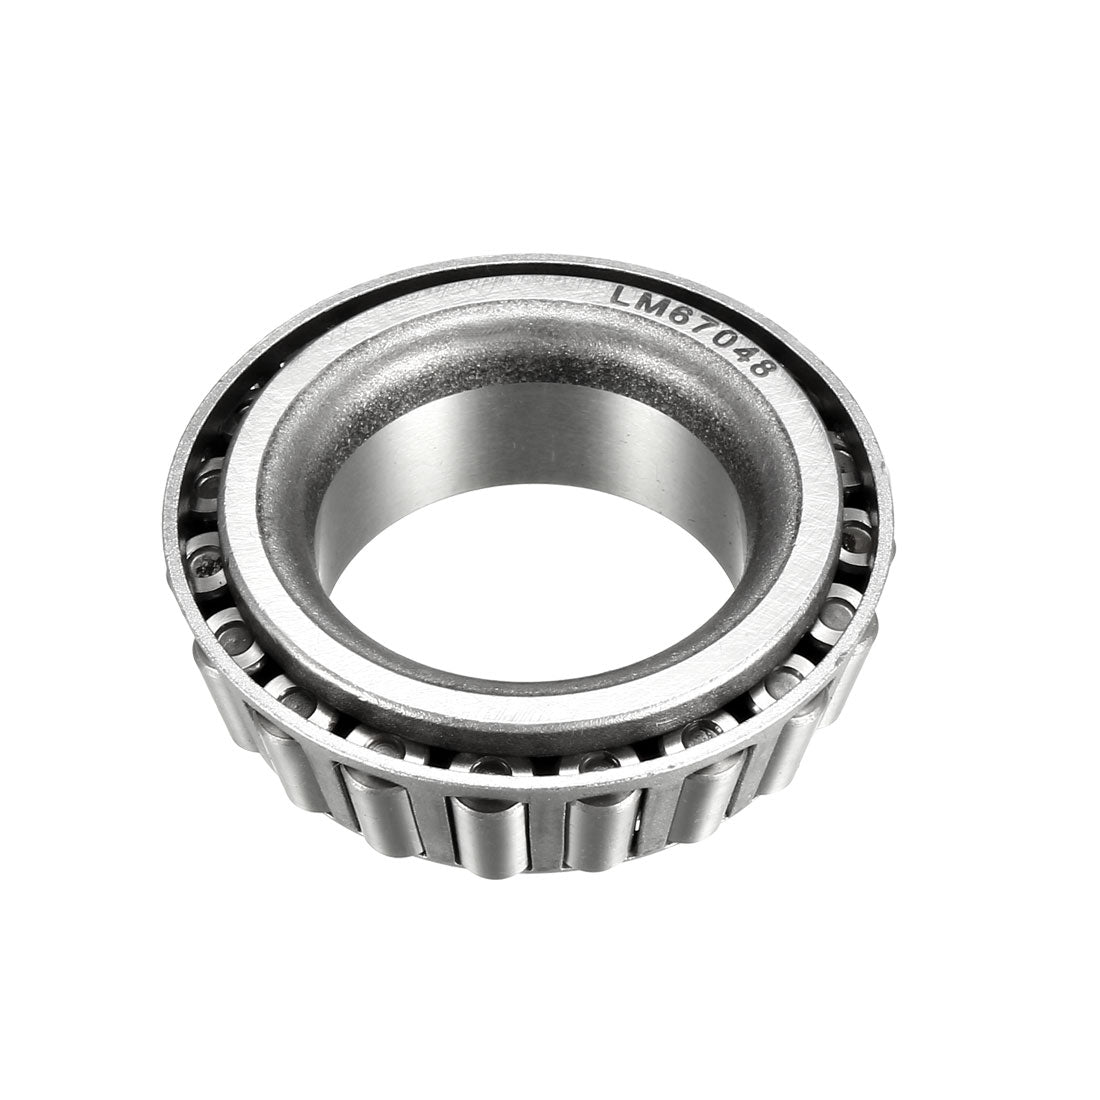 Uxcell Uxcell 14125A Tapered Roller Bearing Single Cone 1.25" Bore 0.771" Width